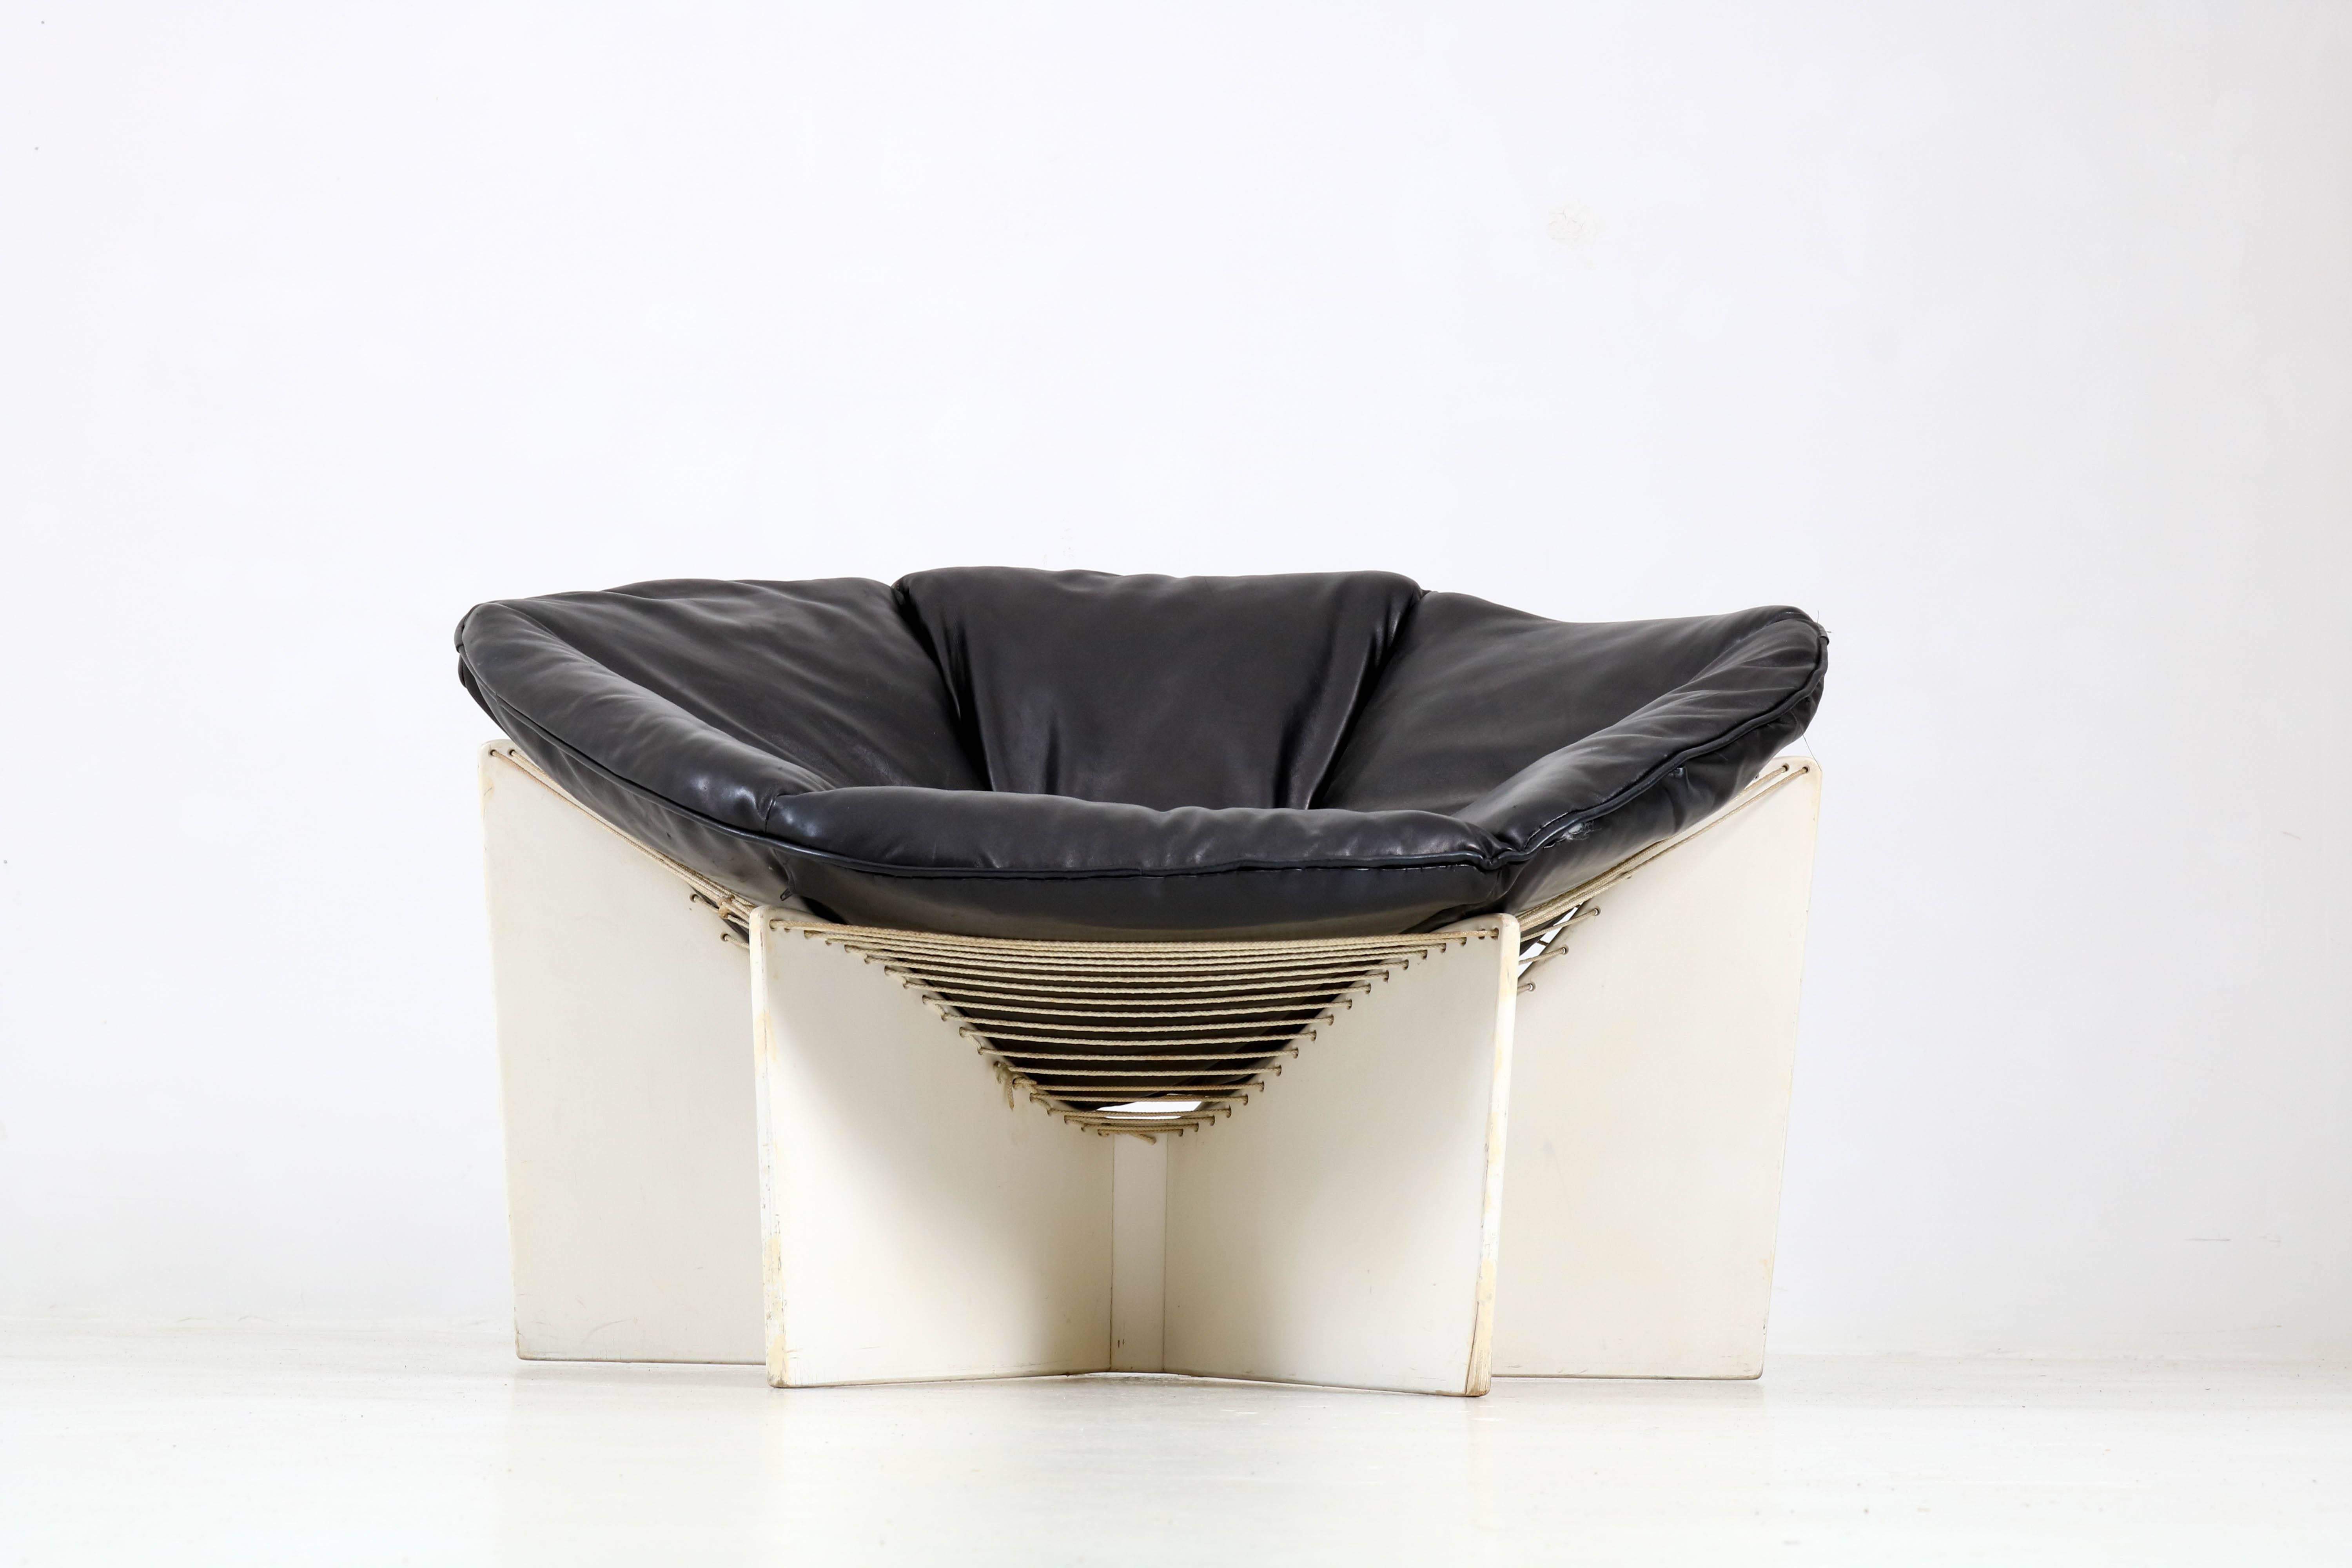 Elegant and rare Mid-Century Modern model 678 spider chair by Pierre Paulin for Artifort.
Iconic design from the 1960s.
White lacquered plywood base with black leather seating.
In good original condition with minor wear consistent with age and